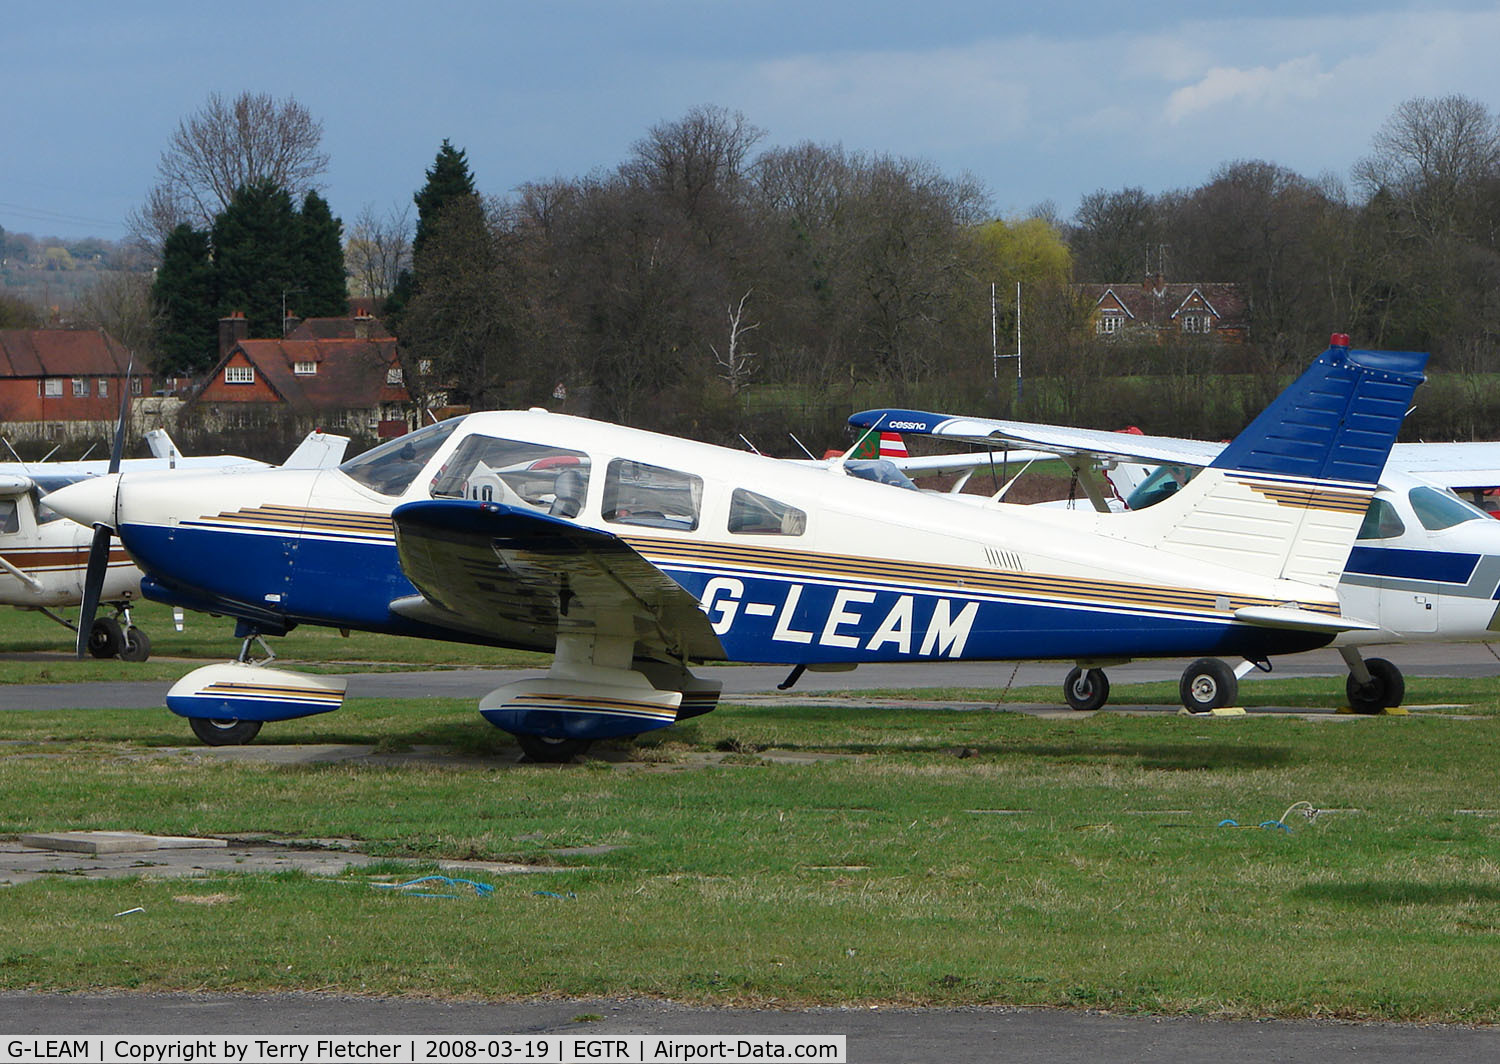 G-LEAM, 1980 Piper PA-28-236 Dakota C/N 28-8011061, Part of the busy GA scene at Elstree Airfield in the northern suburbs of London